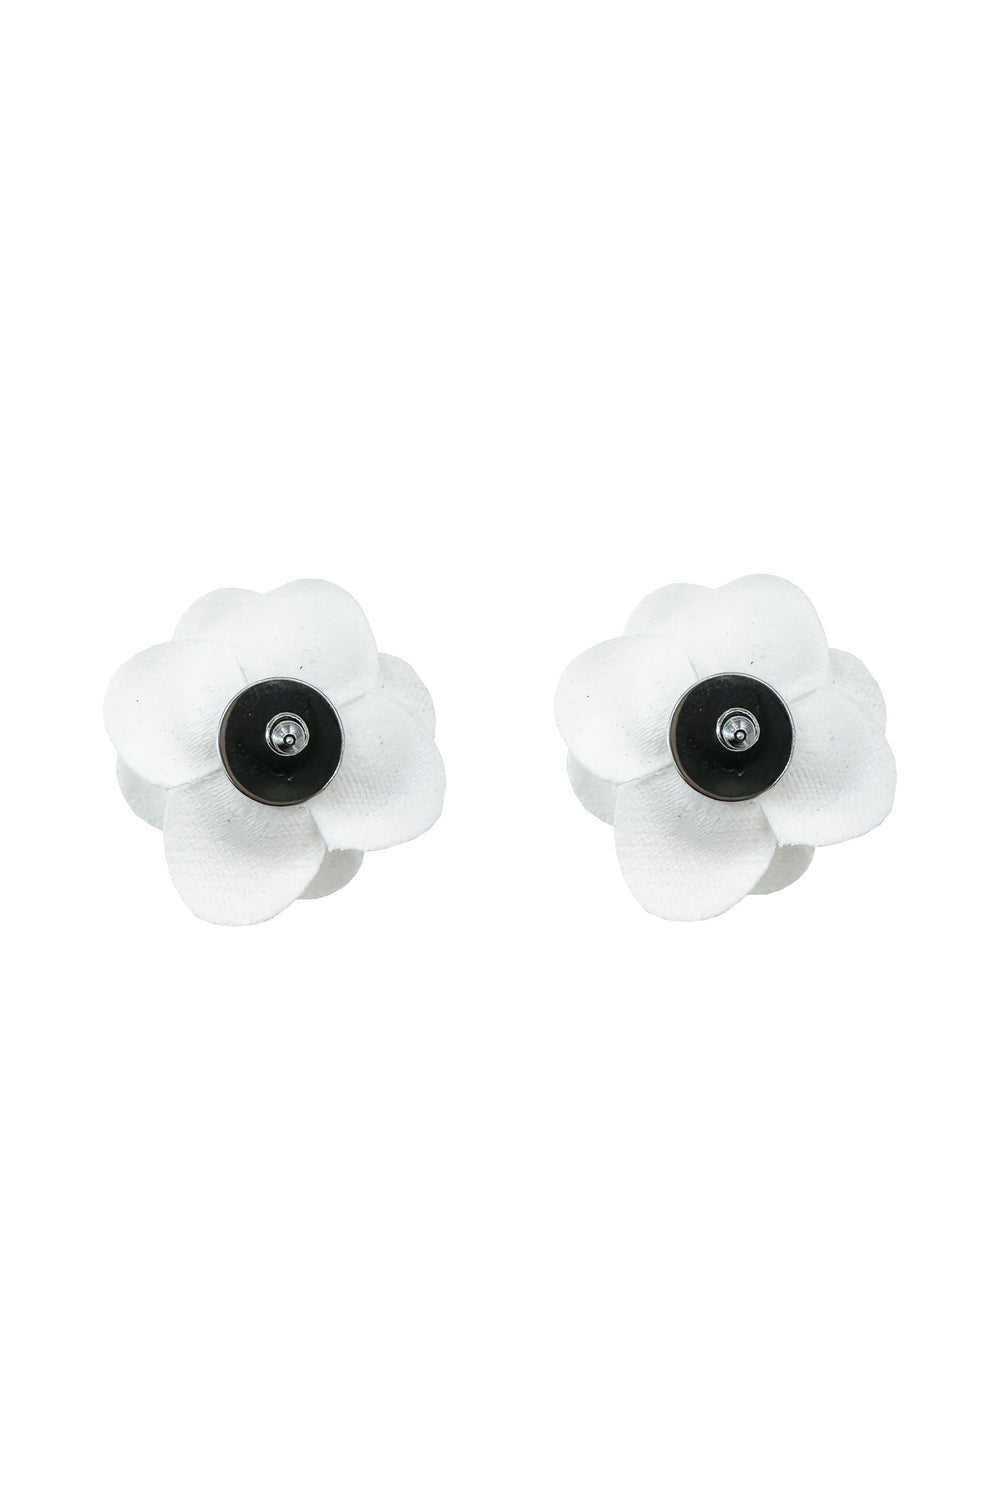 Reverse side of white fabric rose flower studs, highlighting the craftsmanship and providing a glimpse of the secure backing. Elevate your style with these timeless and elegant earrings.